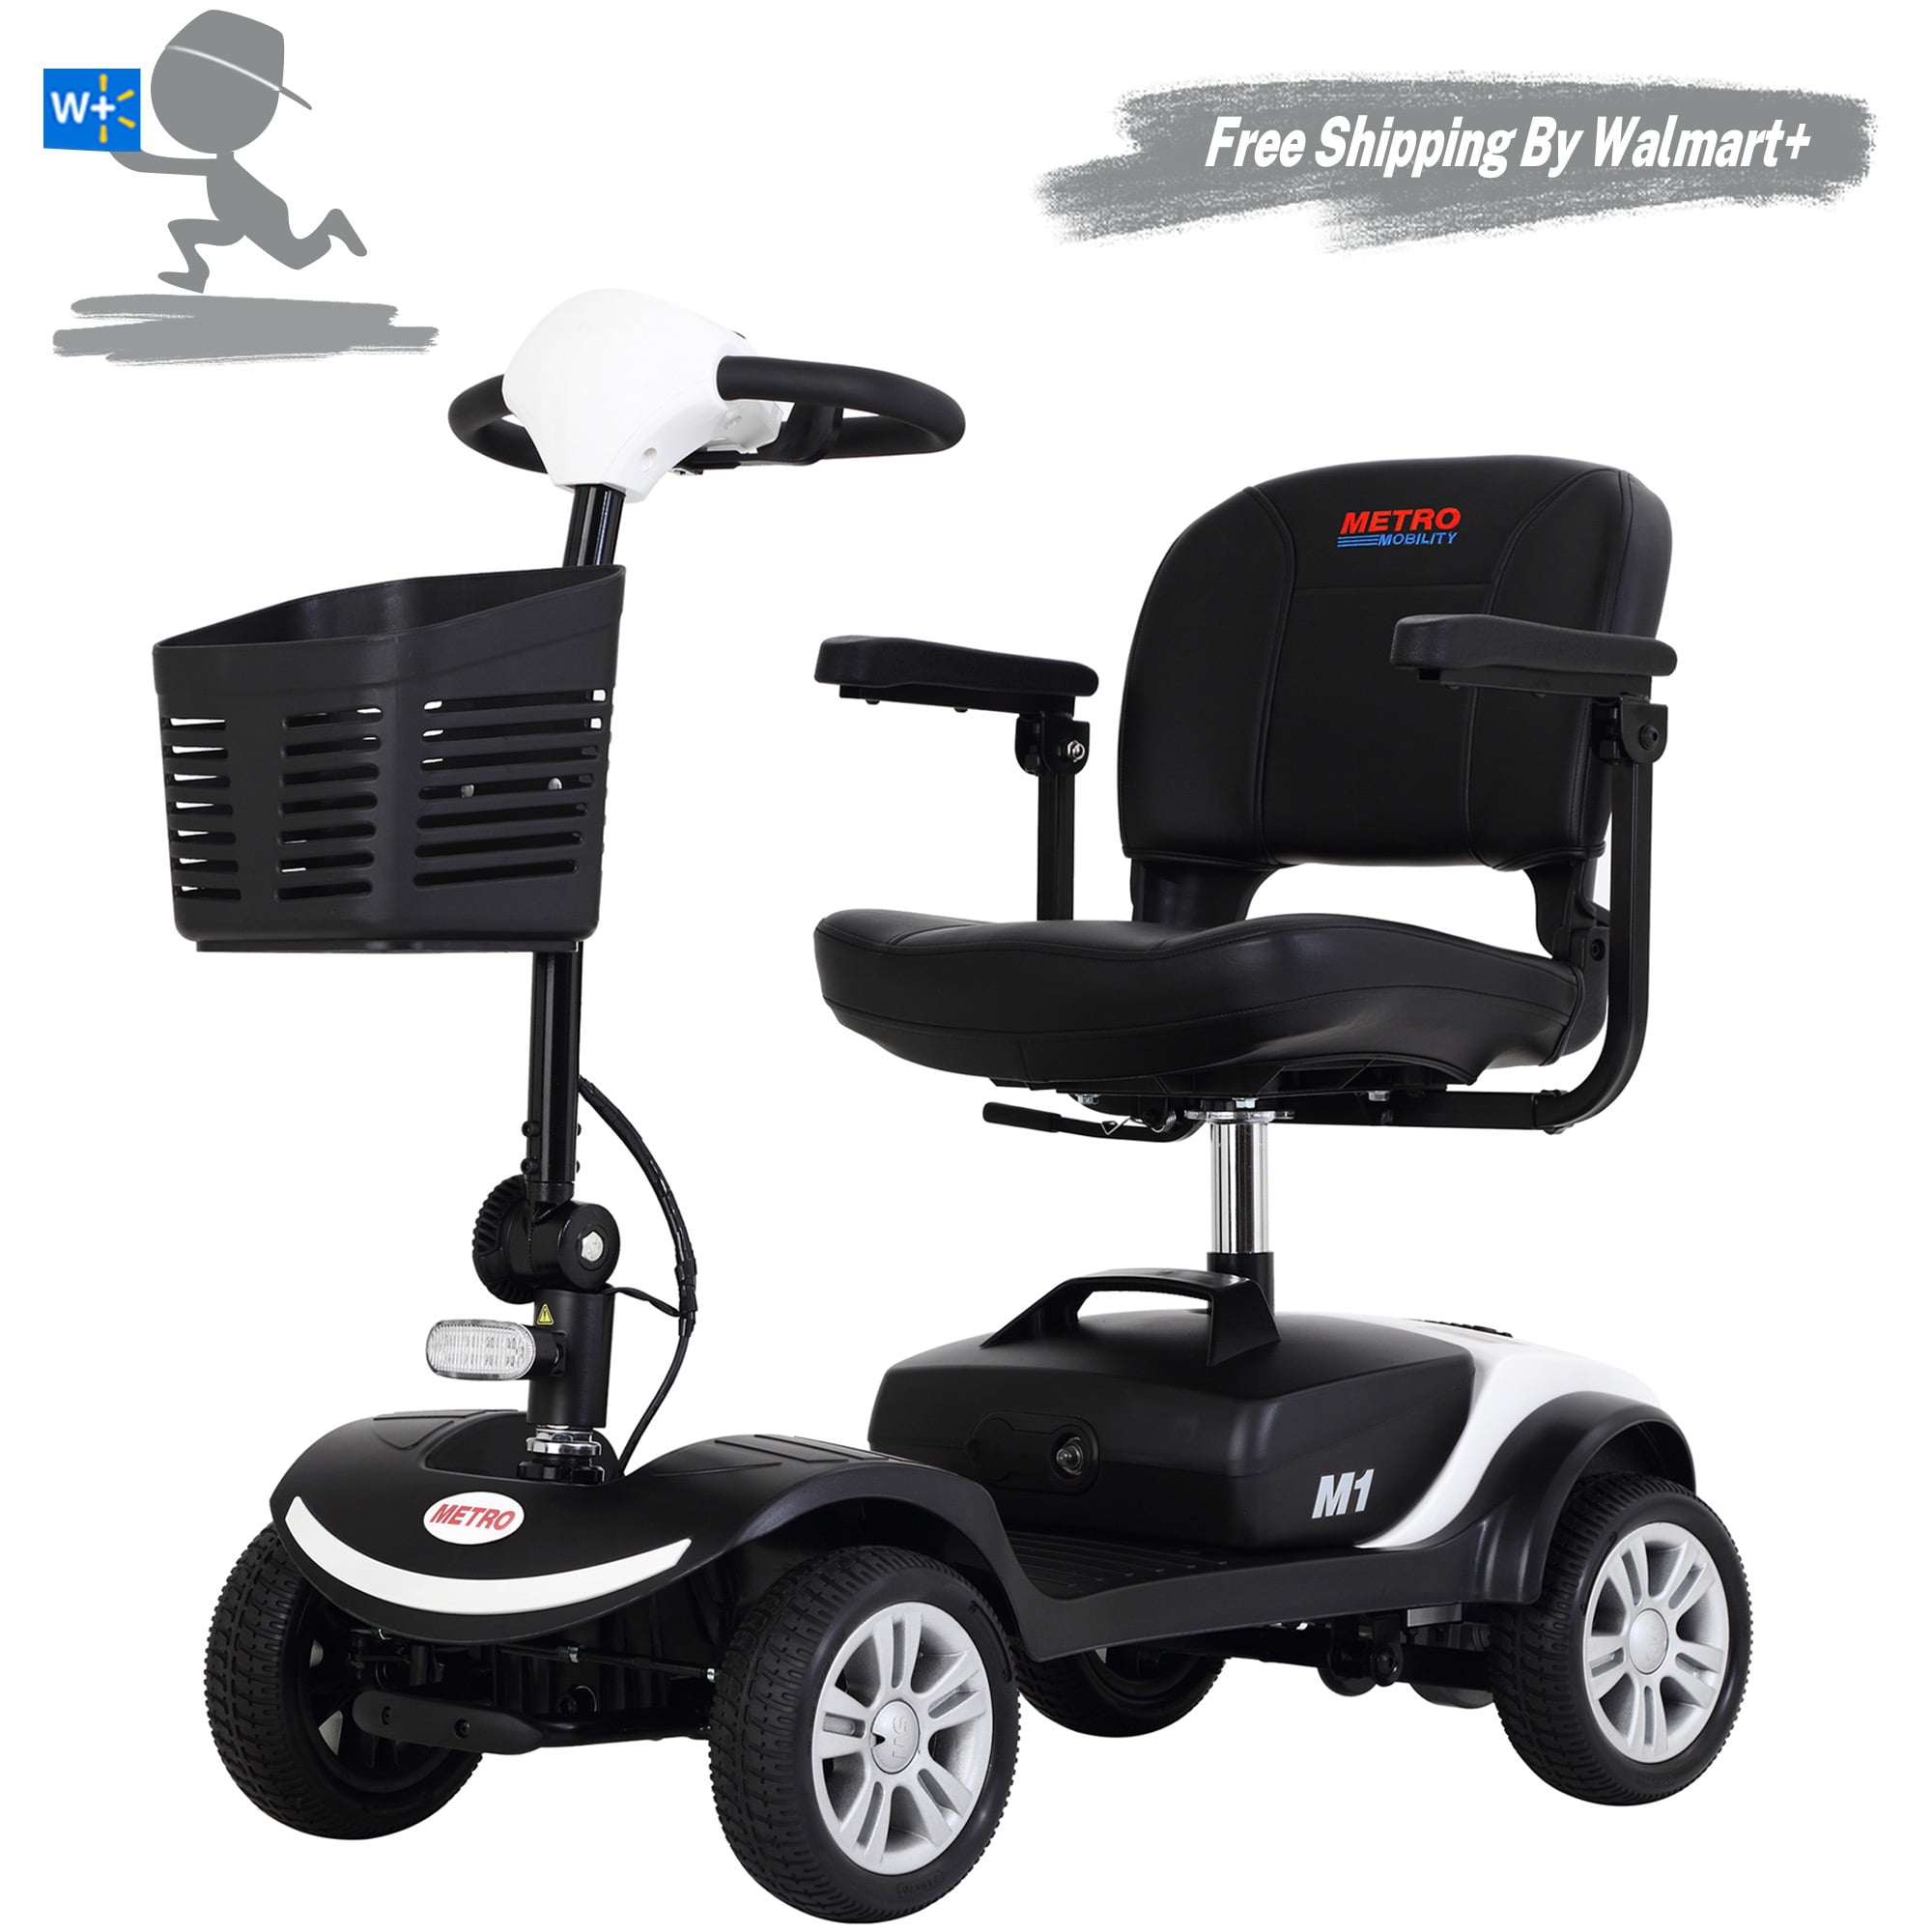 Mobility Scooter for Seniors, 300W Motor Motorized with Headlights, Anti-Tip wheels, - Walmart.com